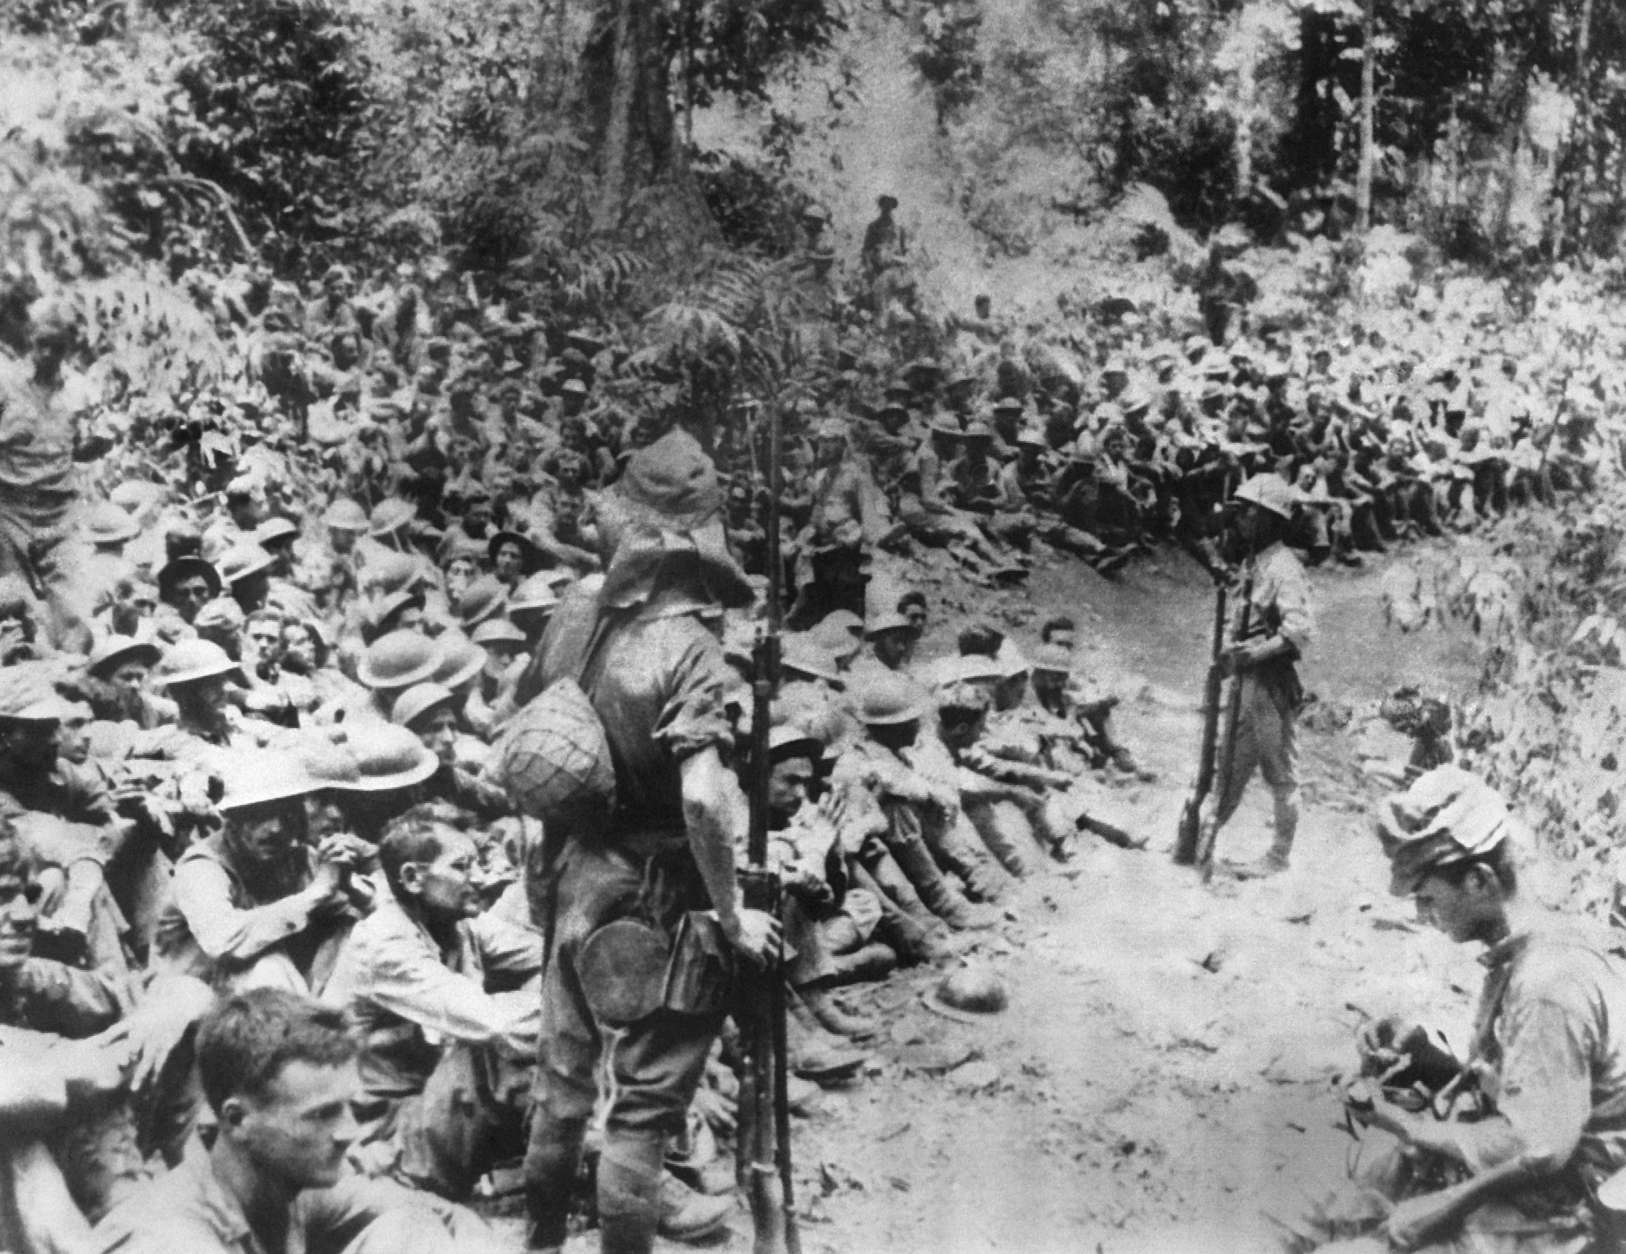 Japanese soldiers stand guard over American war prisoners just before the start of the "March of Death" for the soldiers of Bataan and Corregidor in 1942.  This photograph was stolen from the Japanese by the Philippines during Japan's three-year occupation in World War II.  (AP Photo/U.S. Marine Corps)